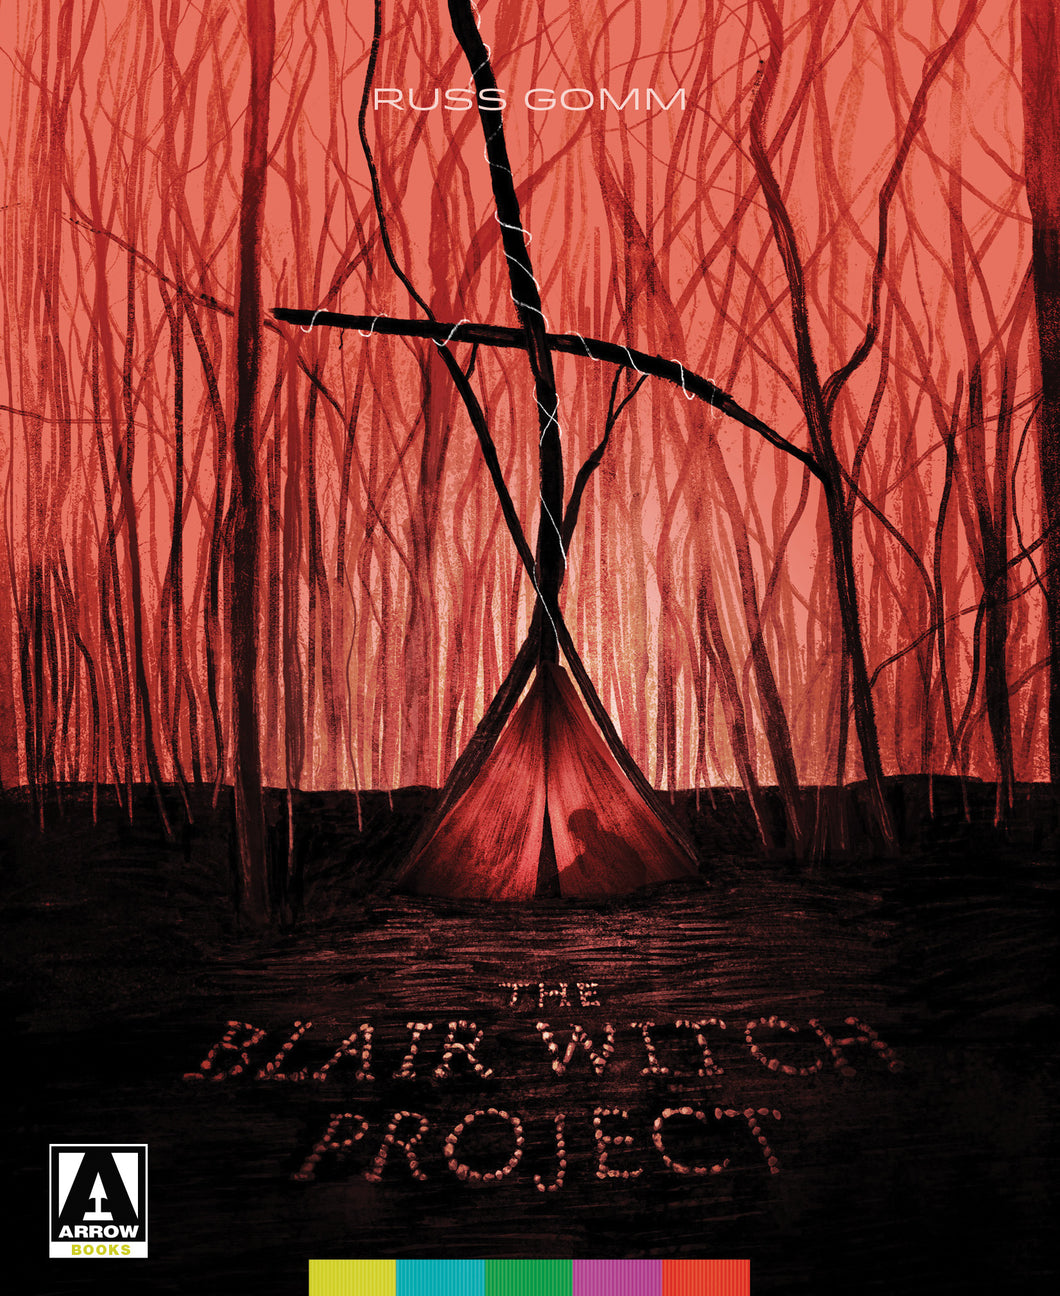 Russell Gomm - The Blair Witch Project (BOOK)